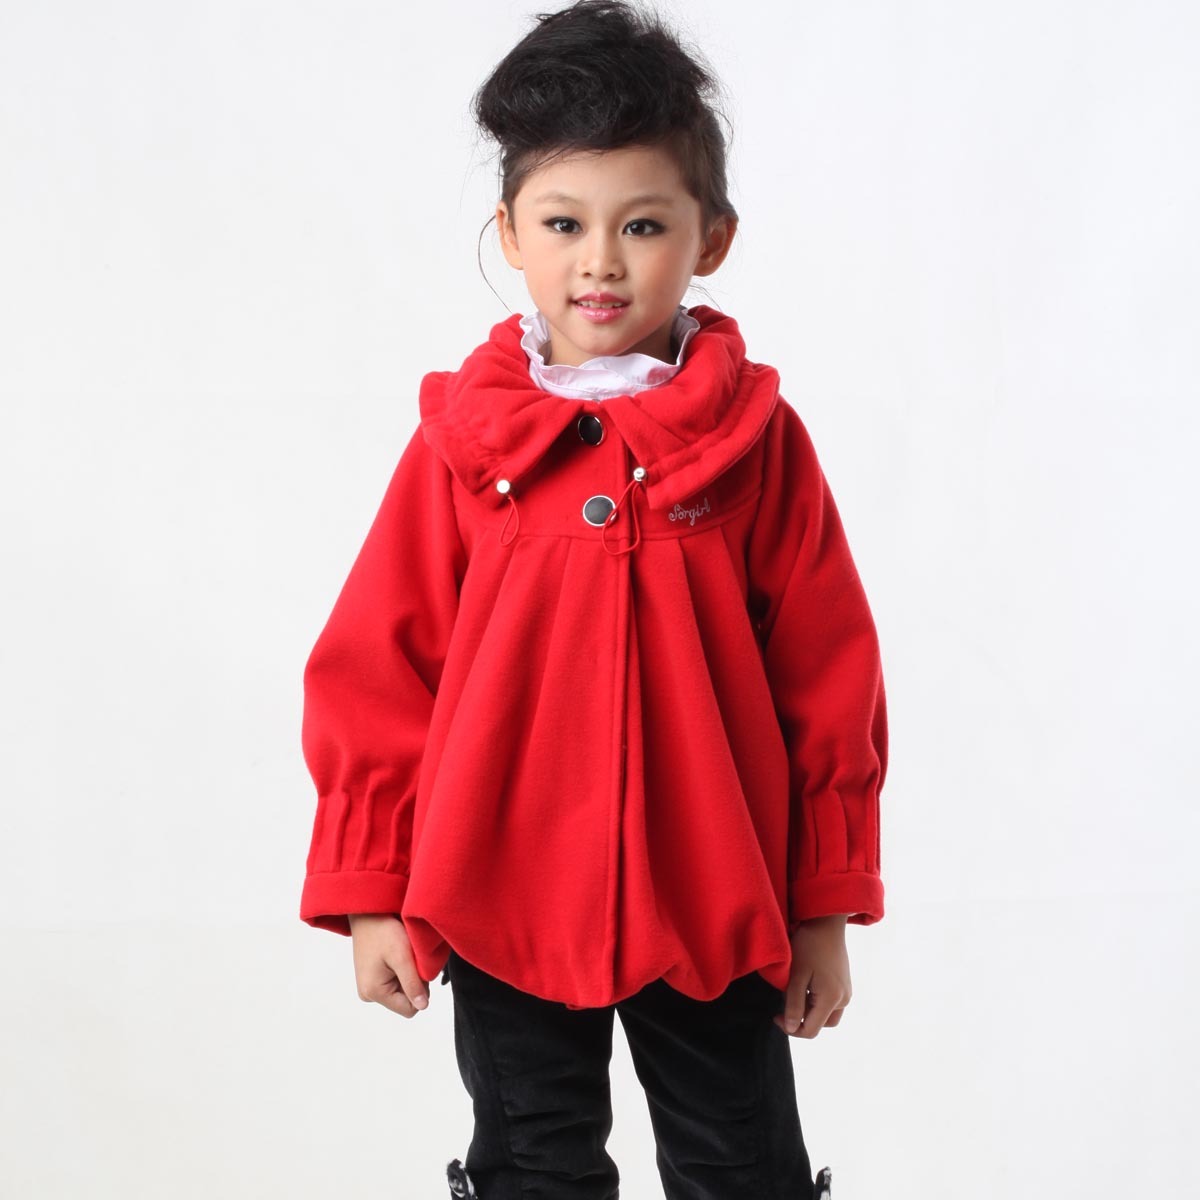 Children's clothing girls clothing autumn 2012 child outerwear autumn overcoat thick trench